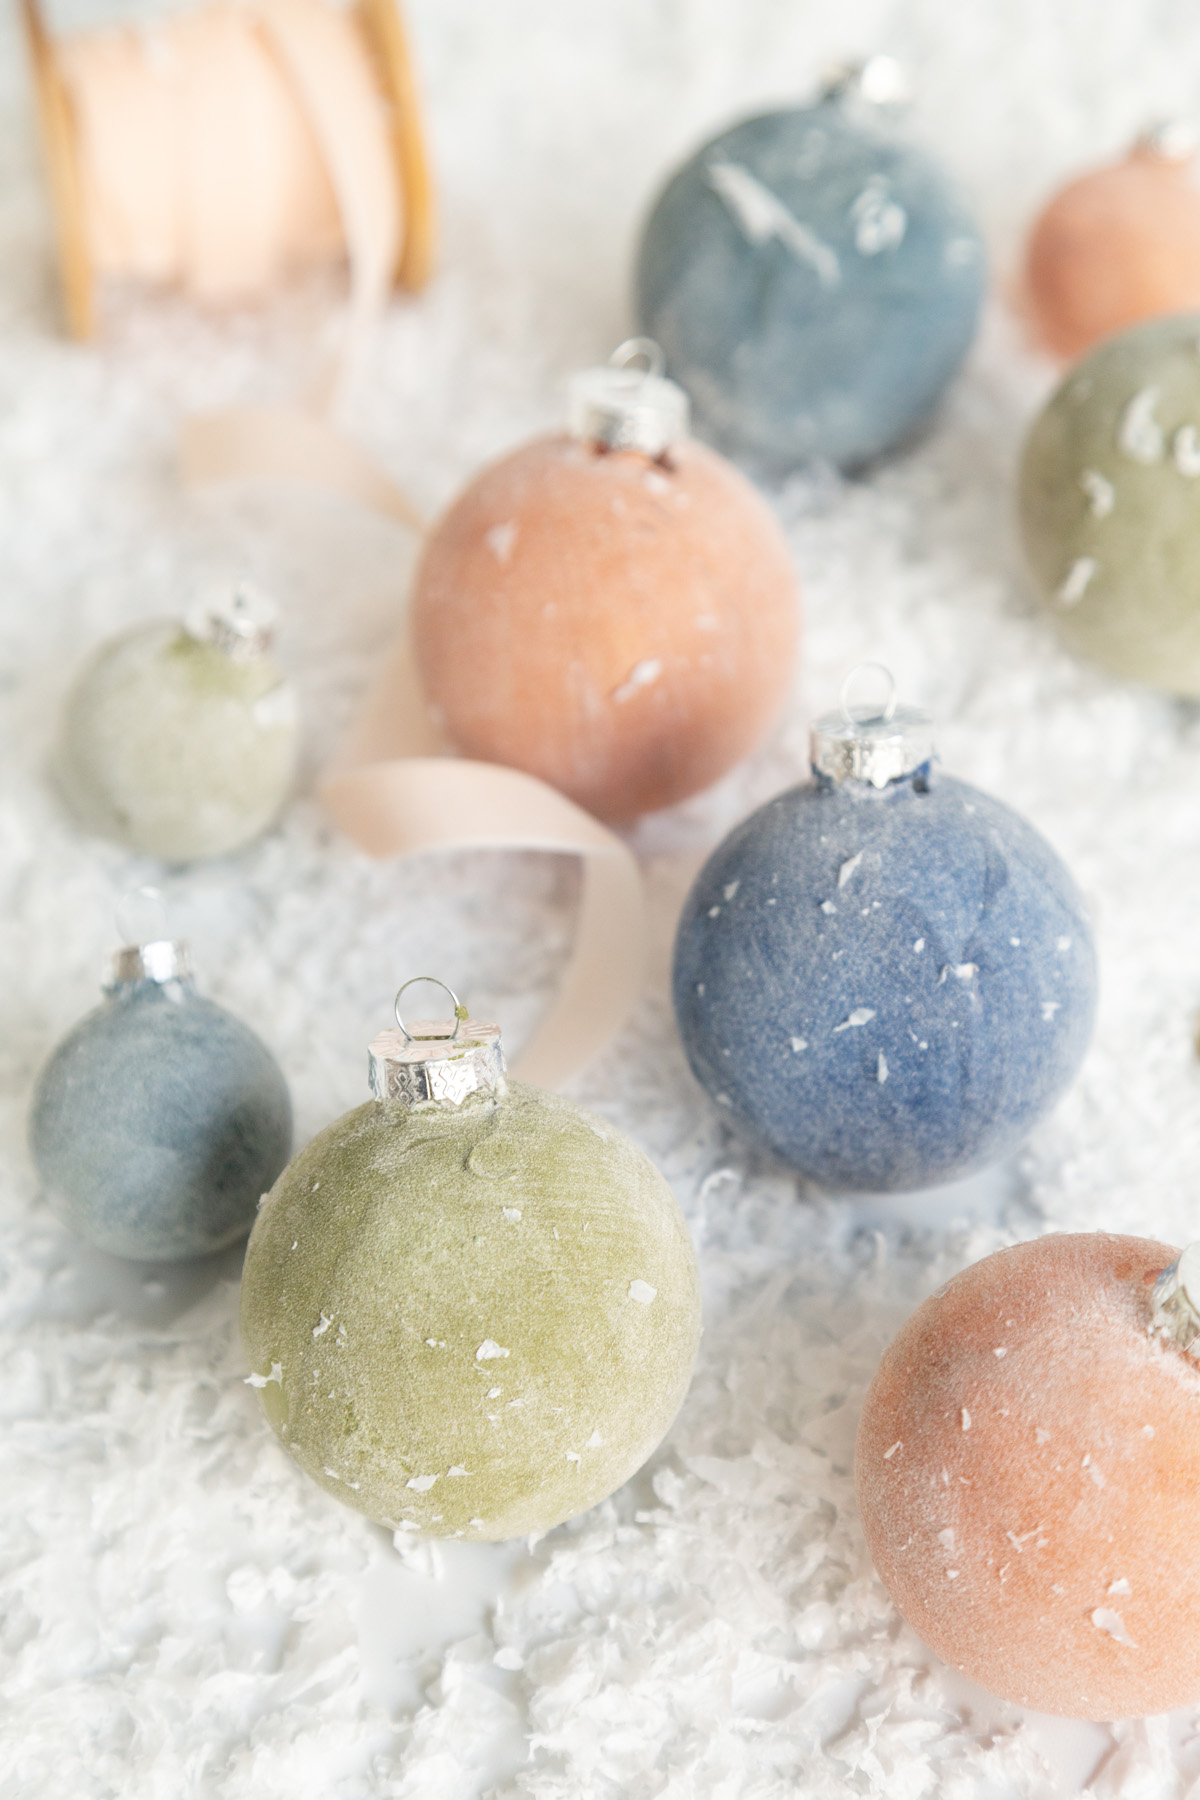 DIY Felt Ornaments with Flocking: Adding Luxe Texture to Your